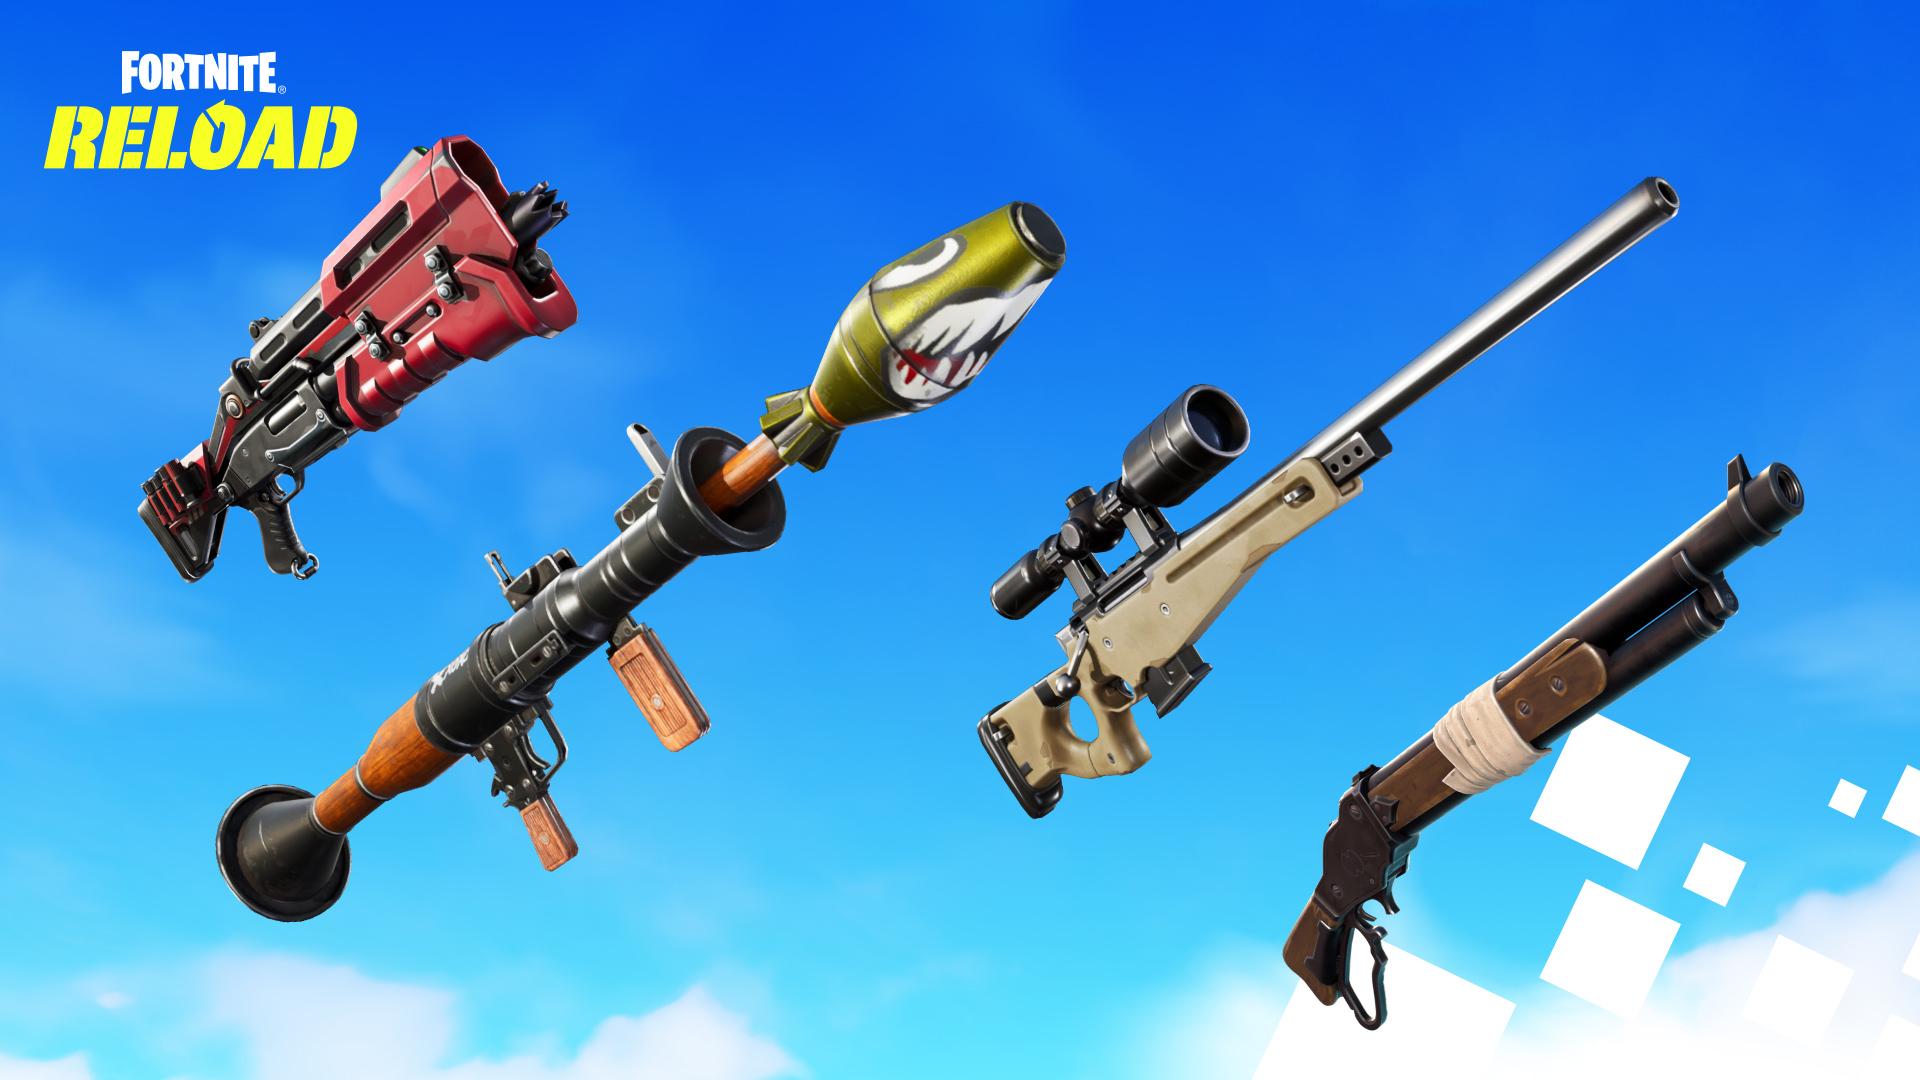 Fortnite Reload weapons.